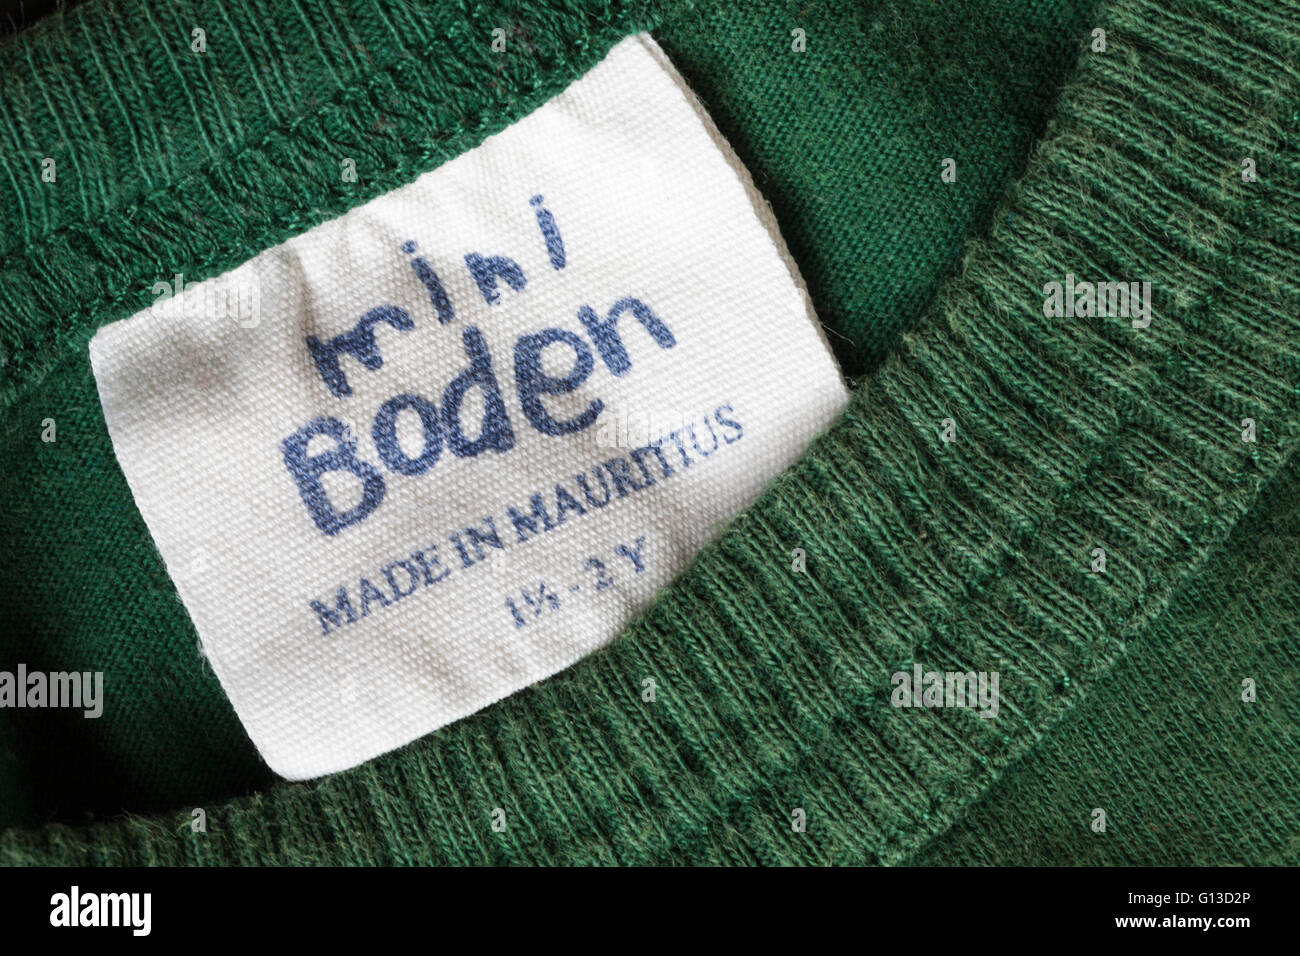 label in mini Boden garment for 1 1/2-2Y made in Mauritius - sold in the UK United Kingdom, Great Britain Stock Photo